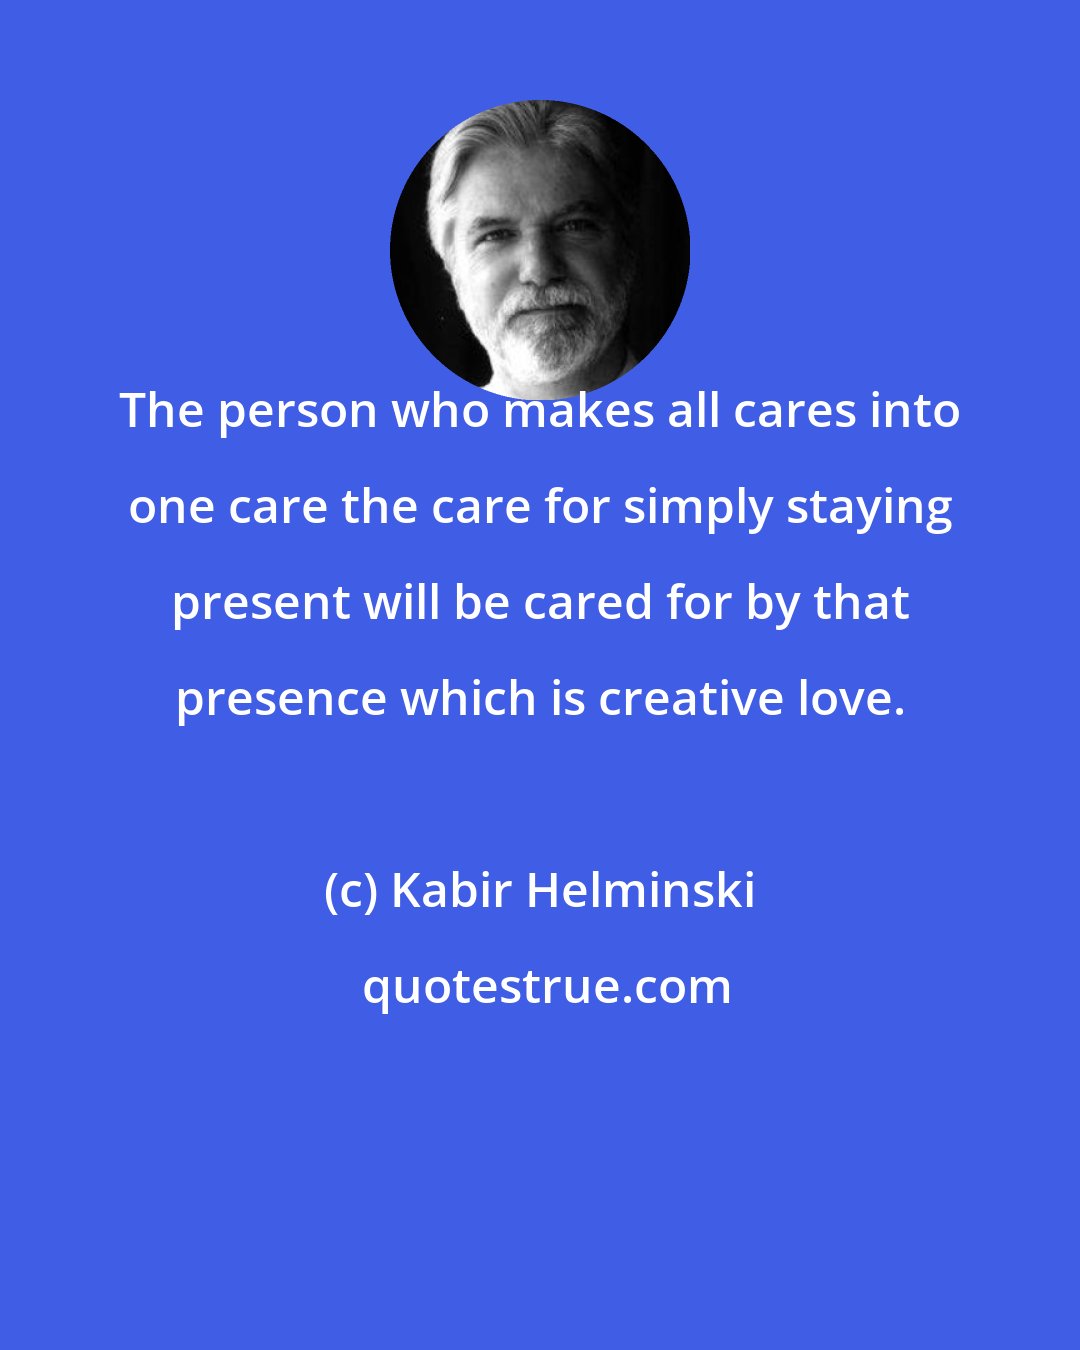 Kabir Helminski: The person who makes all cares into one care the care for simply staying present will be cared for by that presence which is creative love.